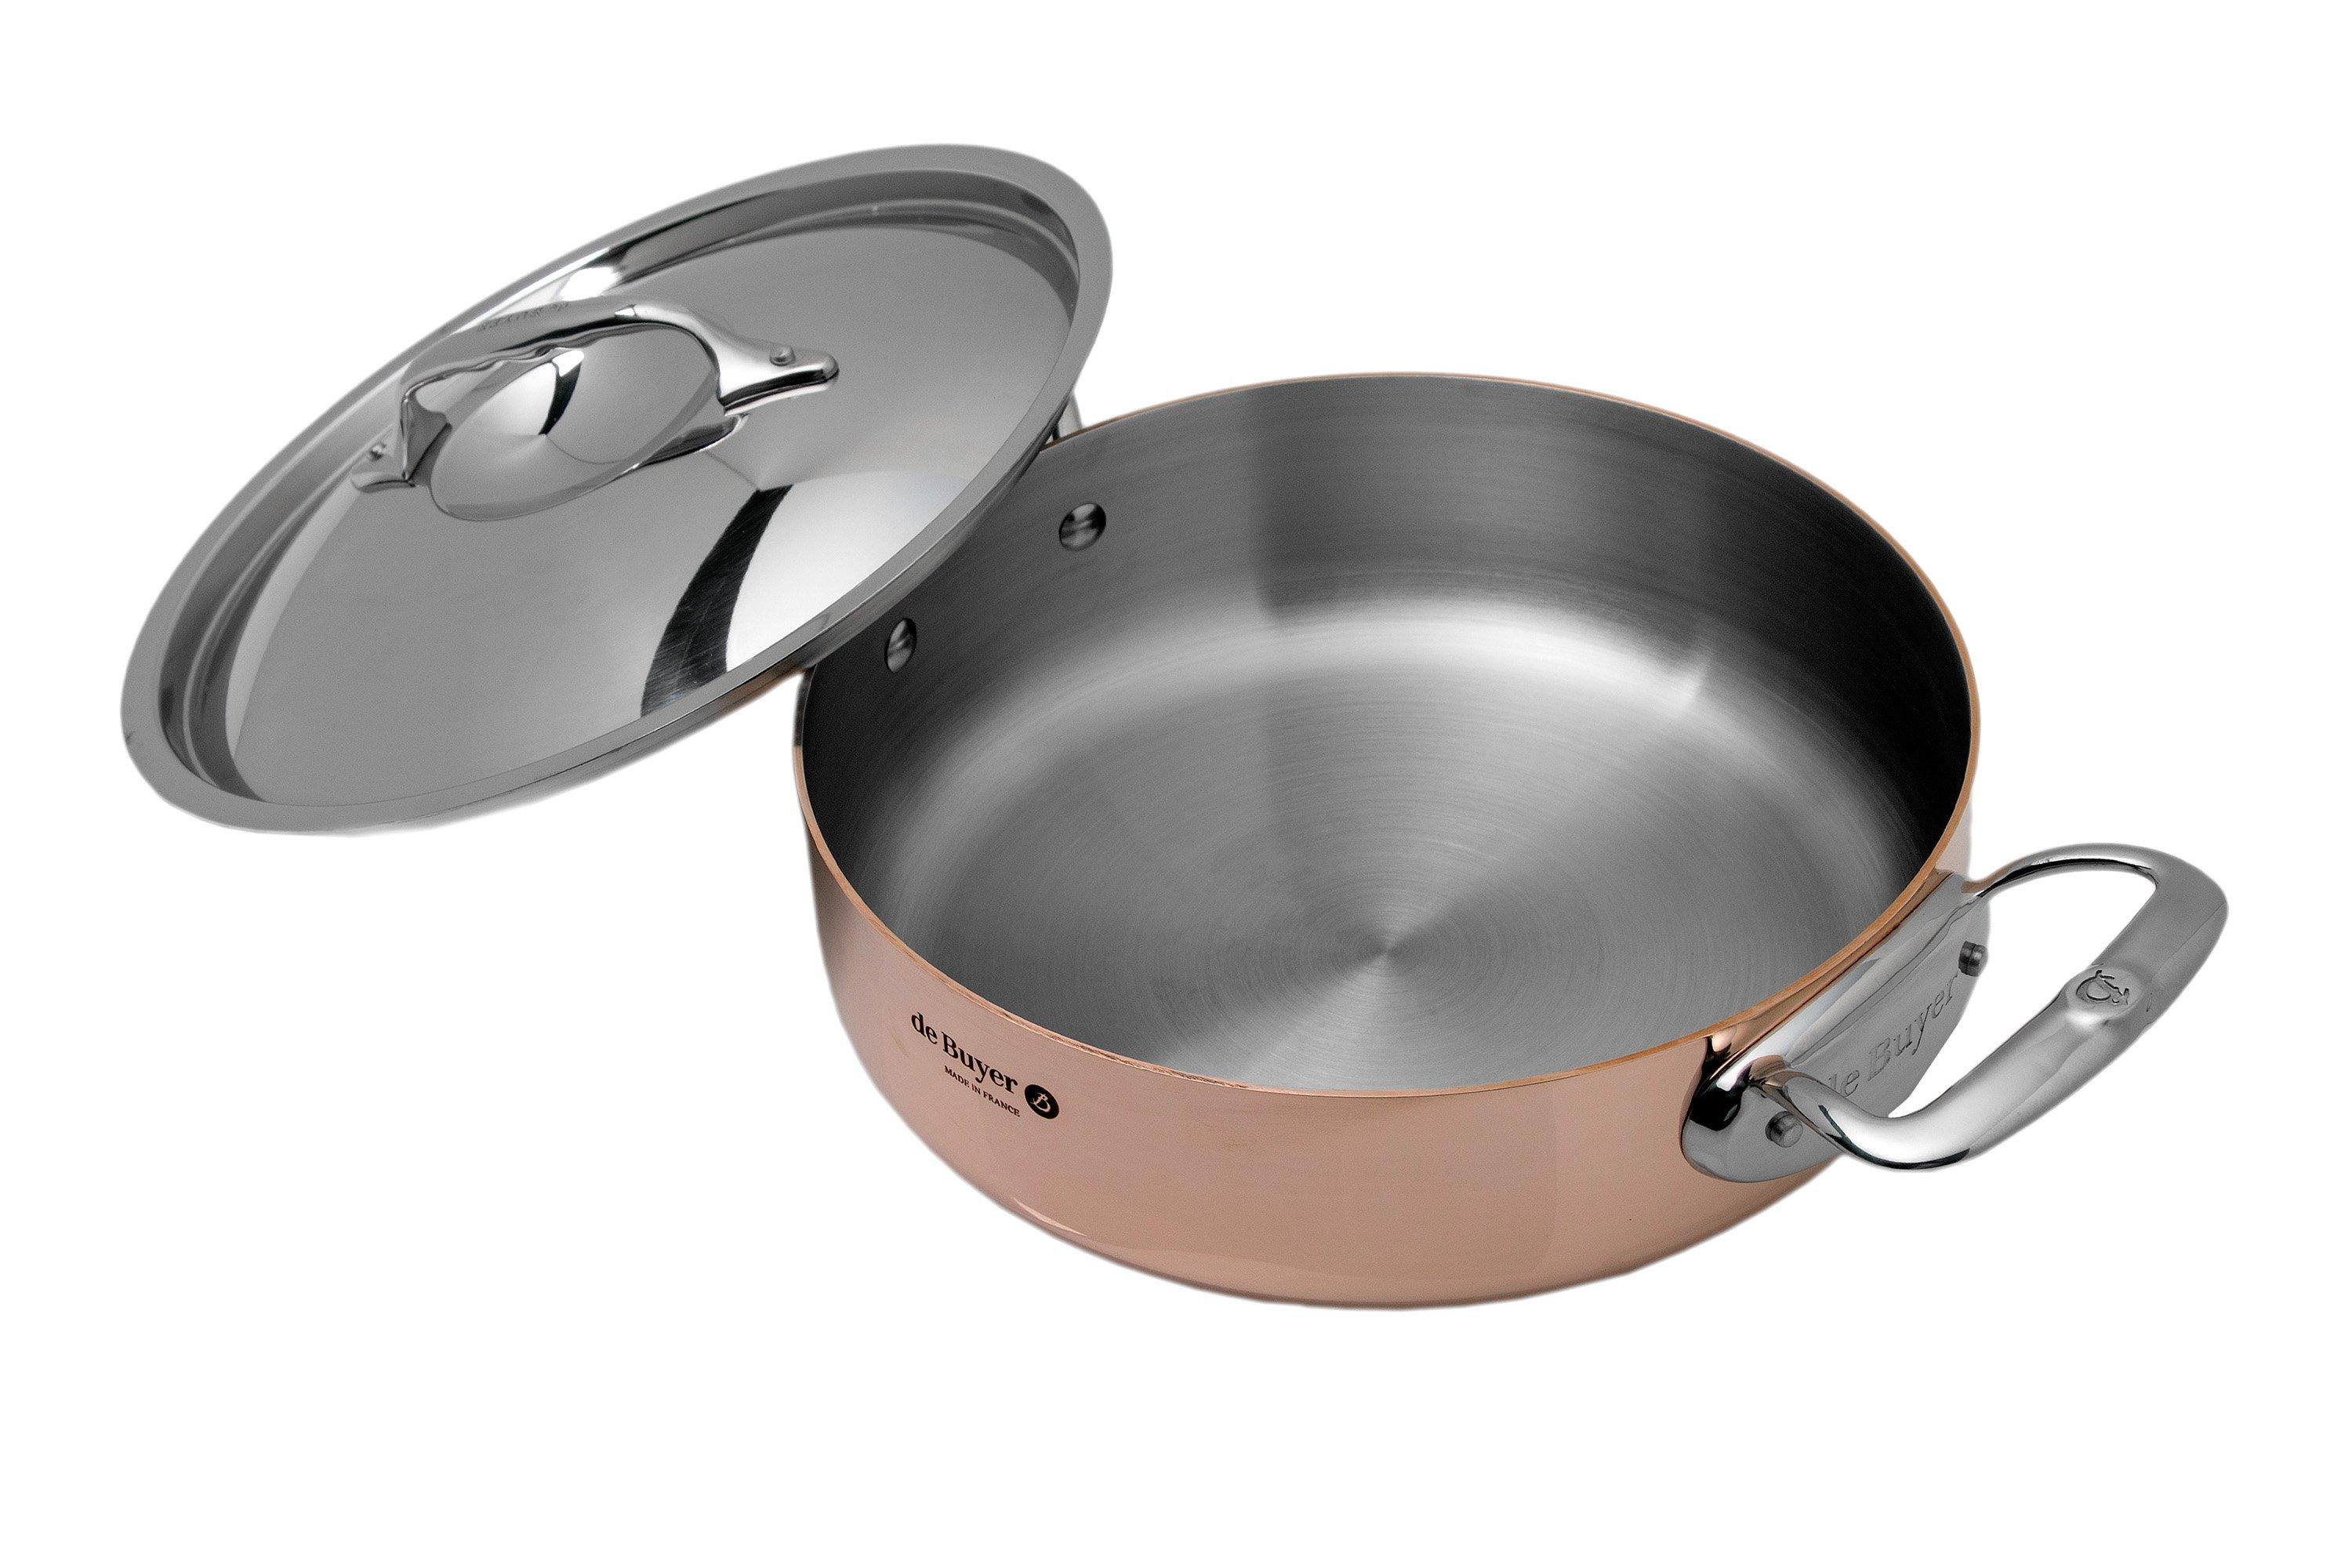 Best Stainless Steel? De Buyer Affinity Stainless Steel Pan Review